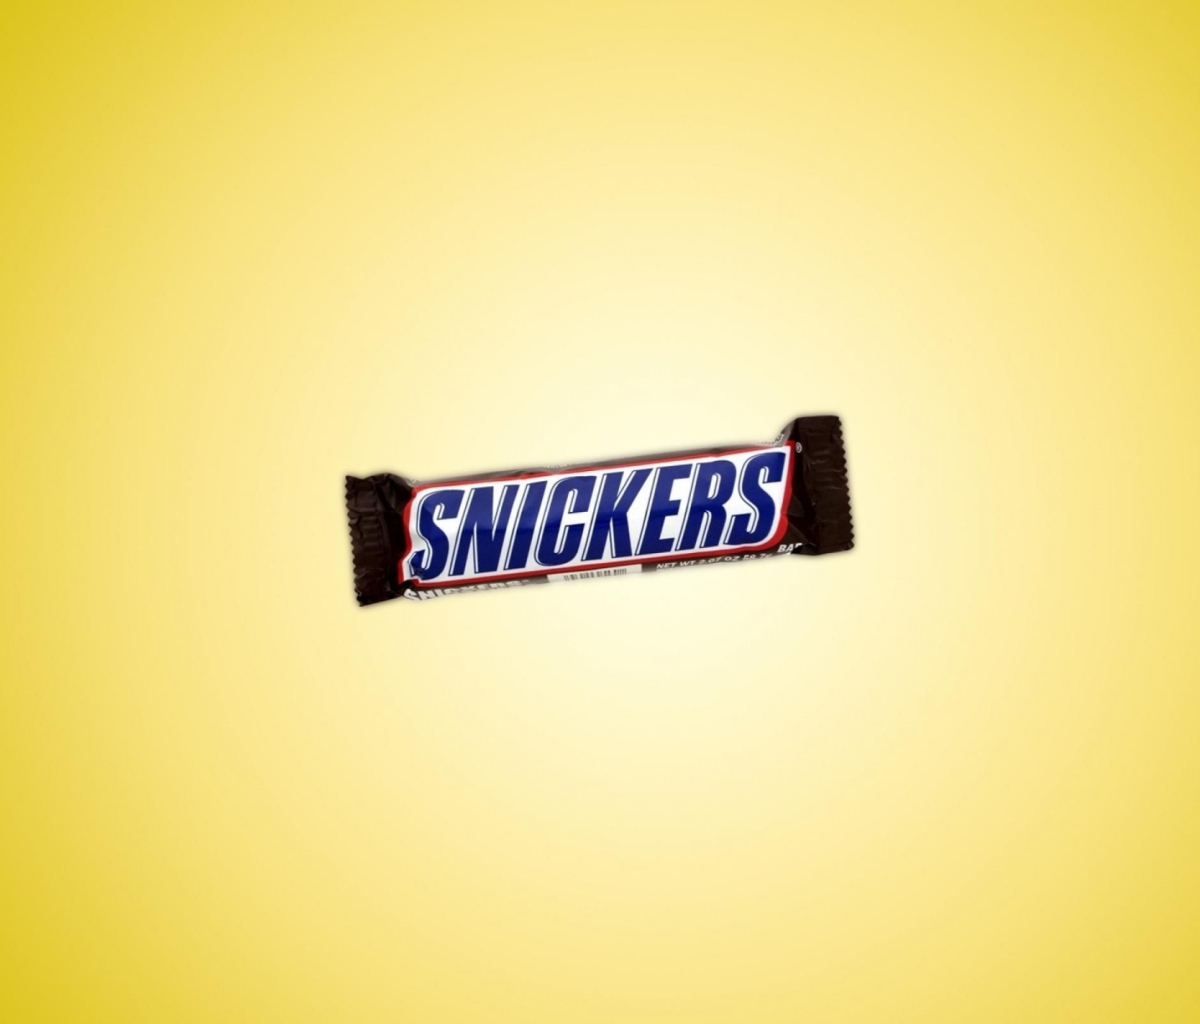 Das Snickers Chocolate Wallpaper 1200x1024